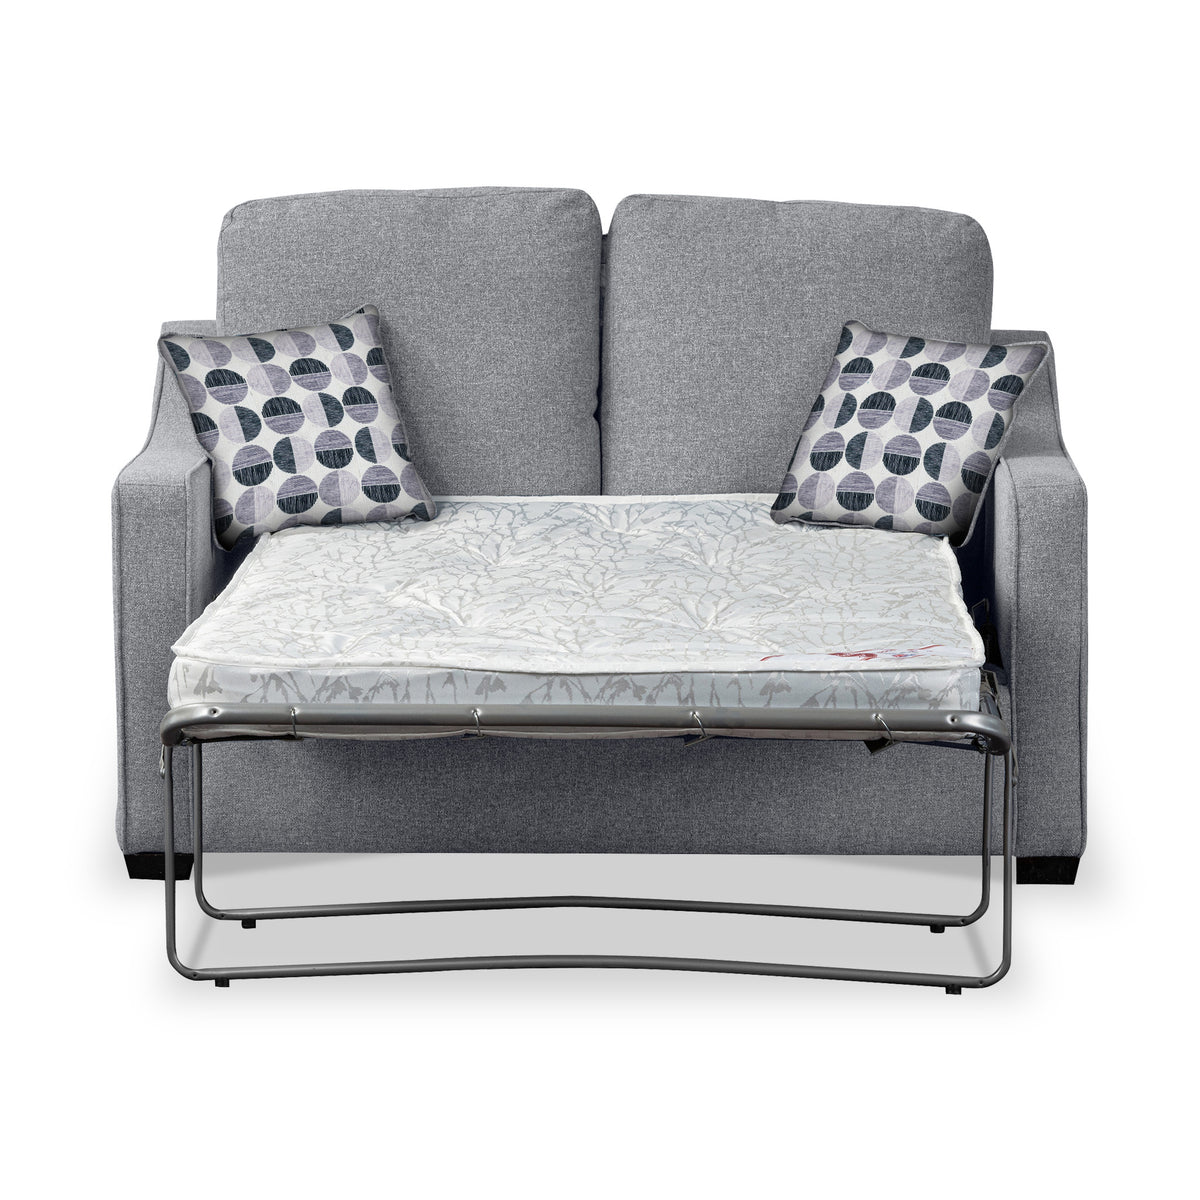 Charlcote Silver Faux Linen 2 Seater Sofabed with Mono Scatter Cushions from Roseland Furniture